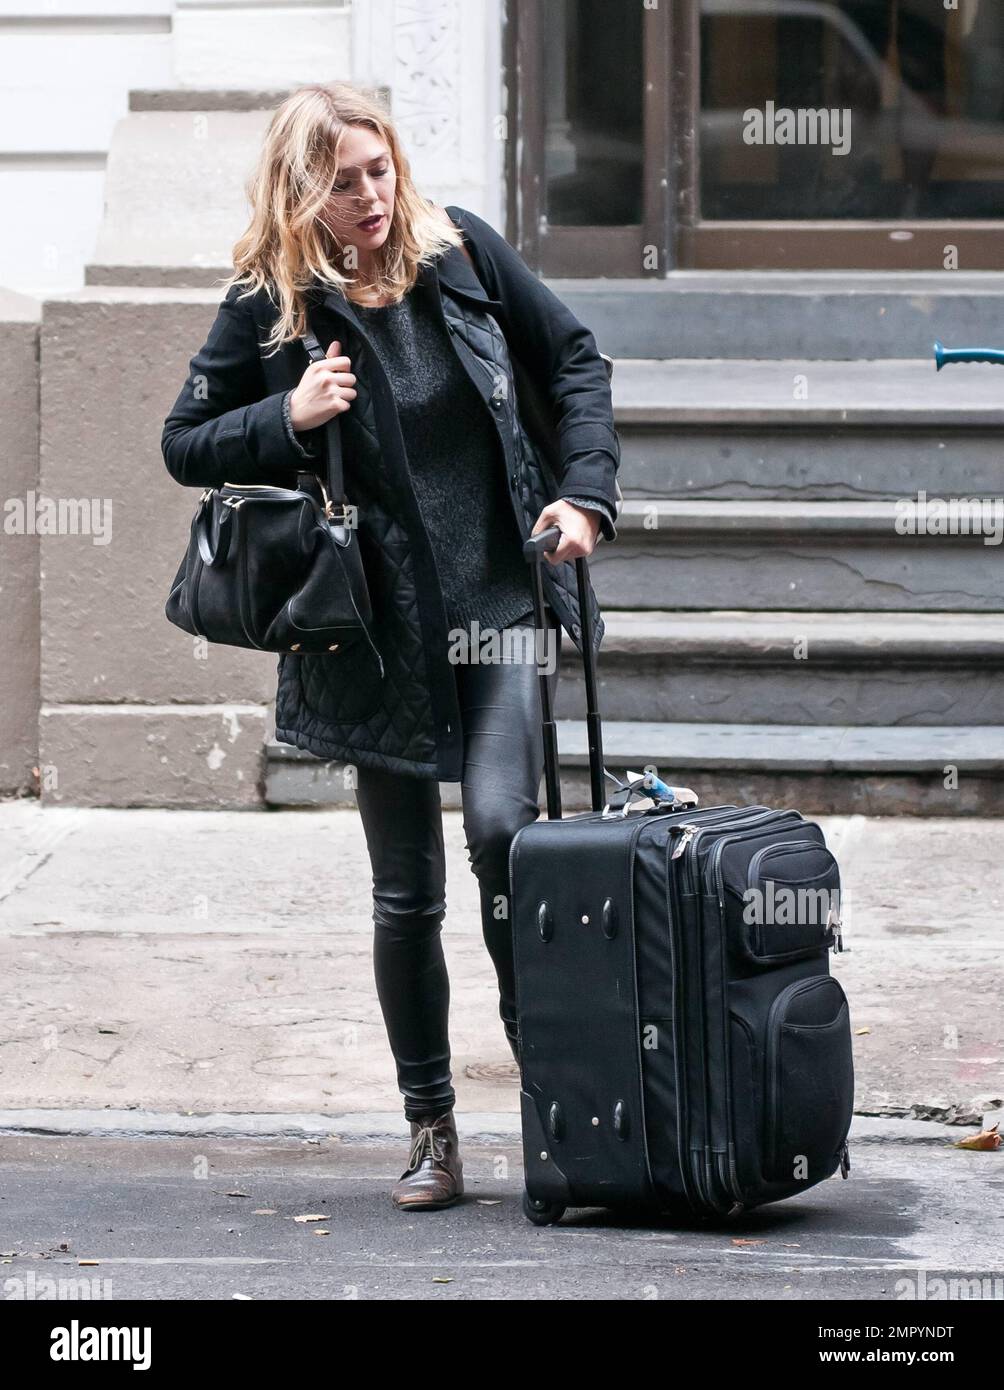 Actress Elizabeth Olsen, younger sister to famous twins Mary-Kate Olsen and Ashley Olsen, was seen departing her West Village apartment with luggage in hand as she made her way to the airport to catch a flight to Los Angeles. It's been reported that Elizabeth has become an overnight starlet with her lead debut in 'Martha Marcy May Marlene' which premiered earlier this week at the New York Film Festival. The film has a limited release date of October 21st and is already generating Oscar buzz. New York, NY. 13th October 2011.    . Stock Photo